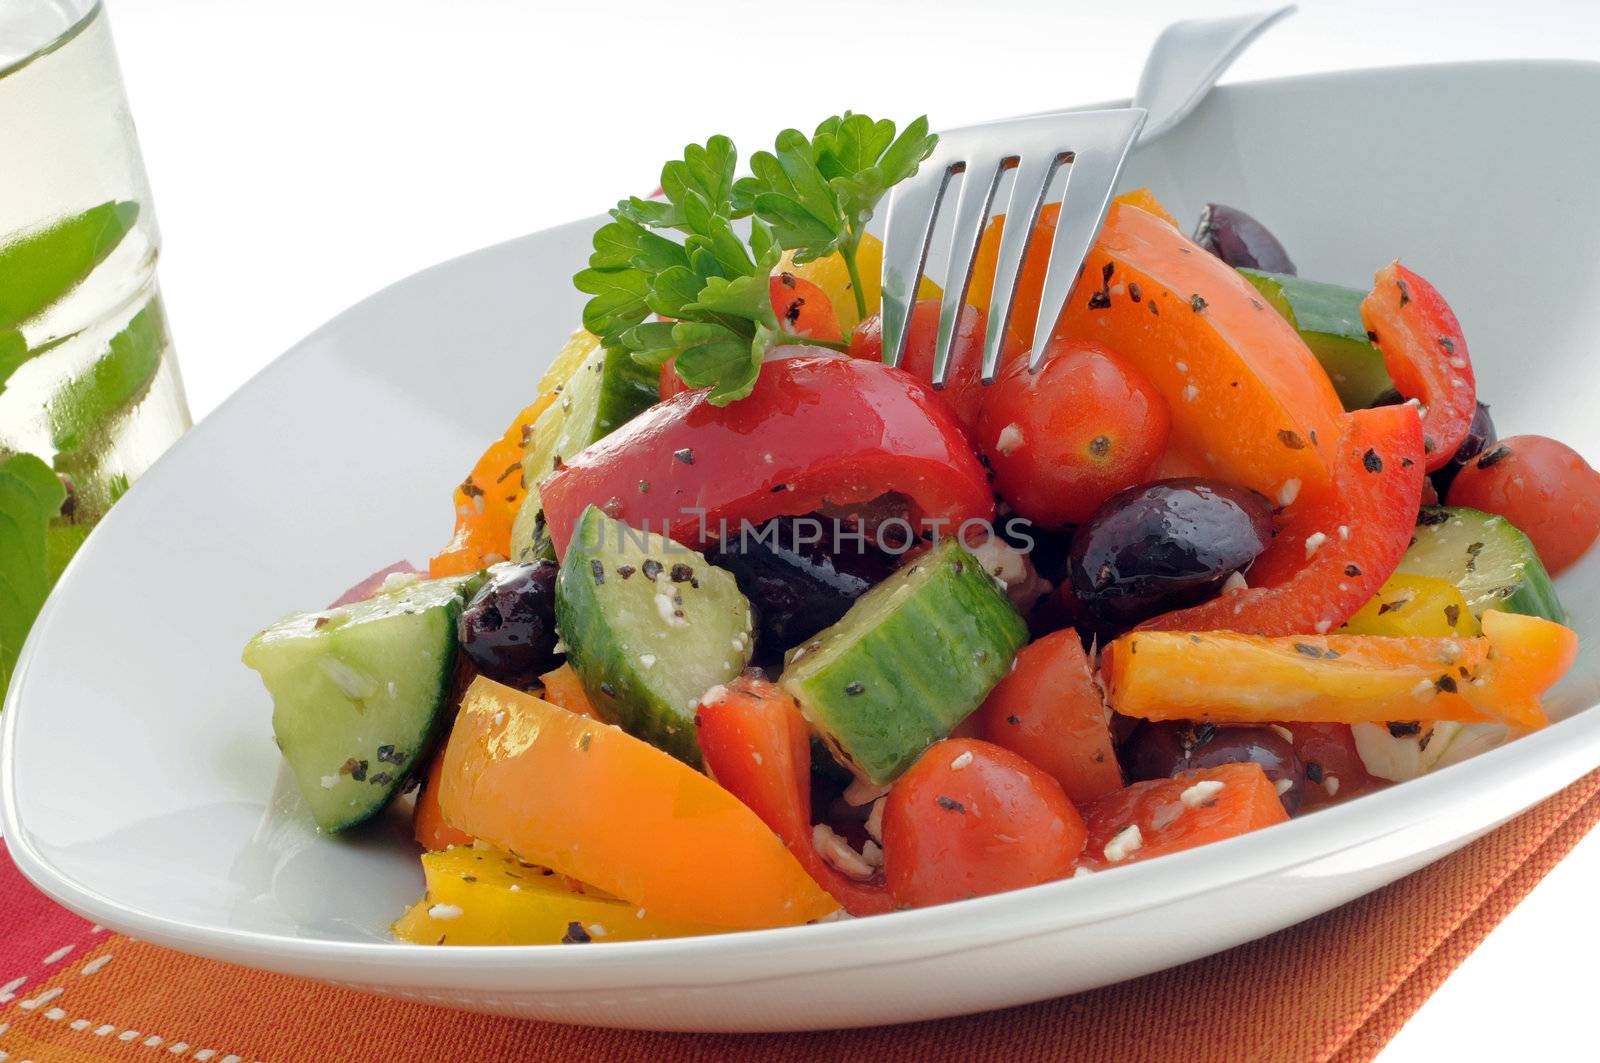 Colorful and tasty vegetable salad in a white bowl.